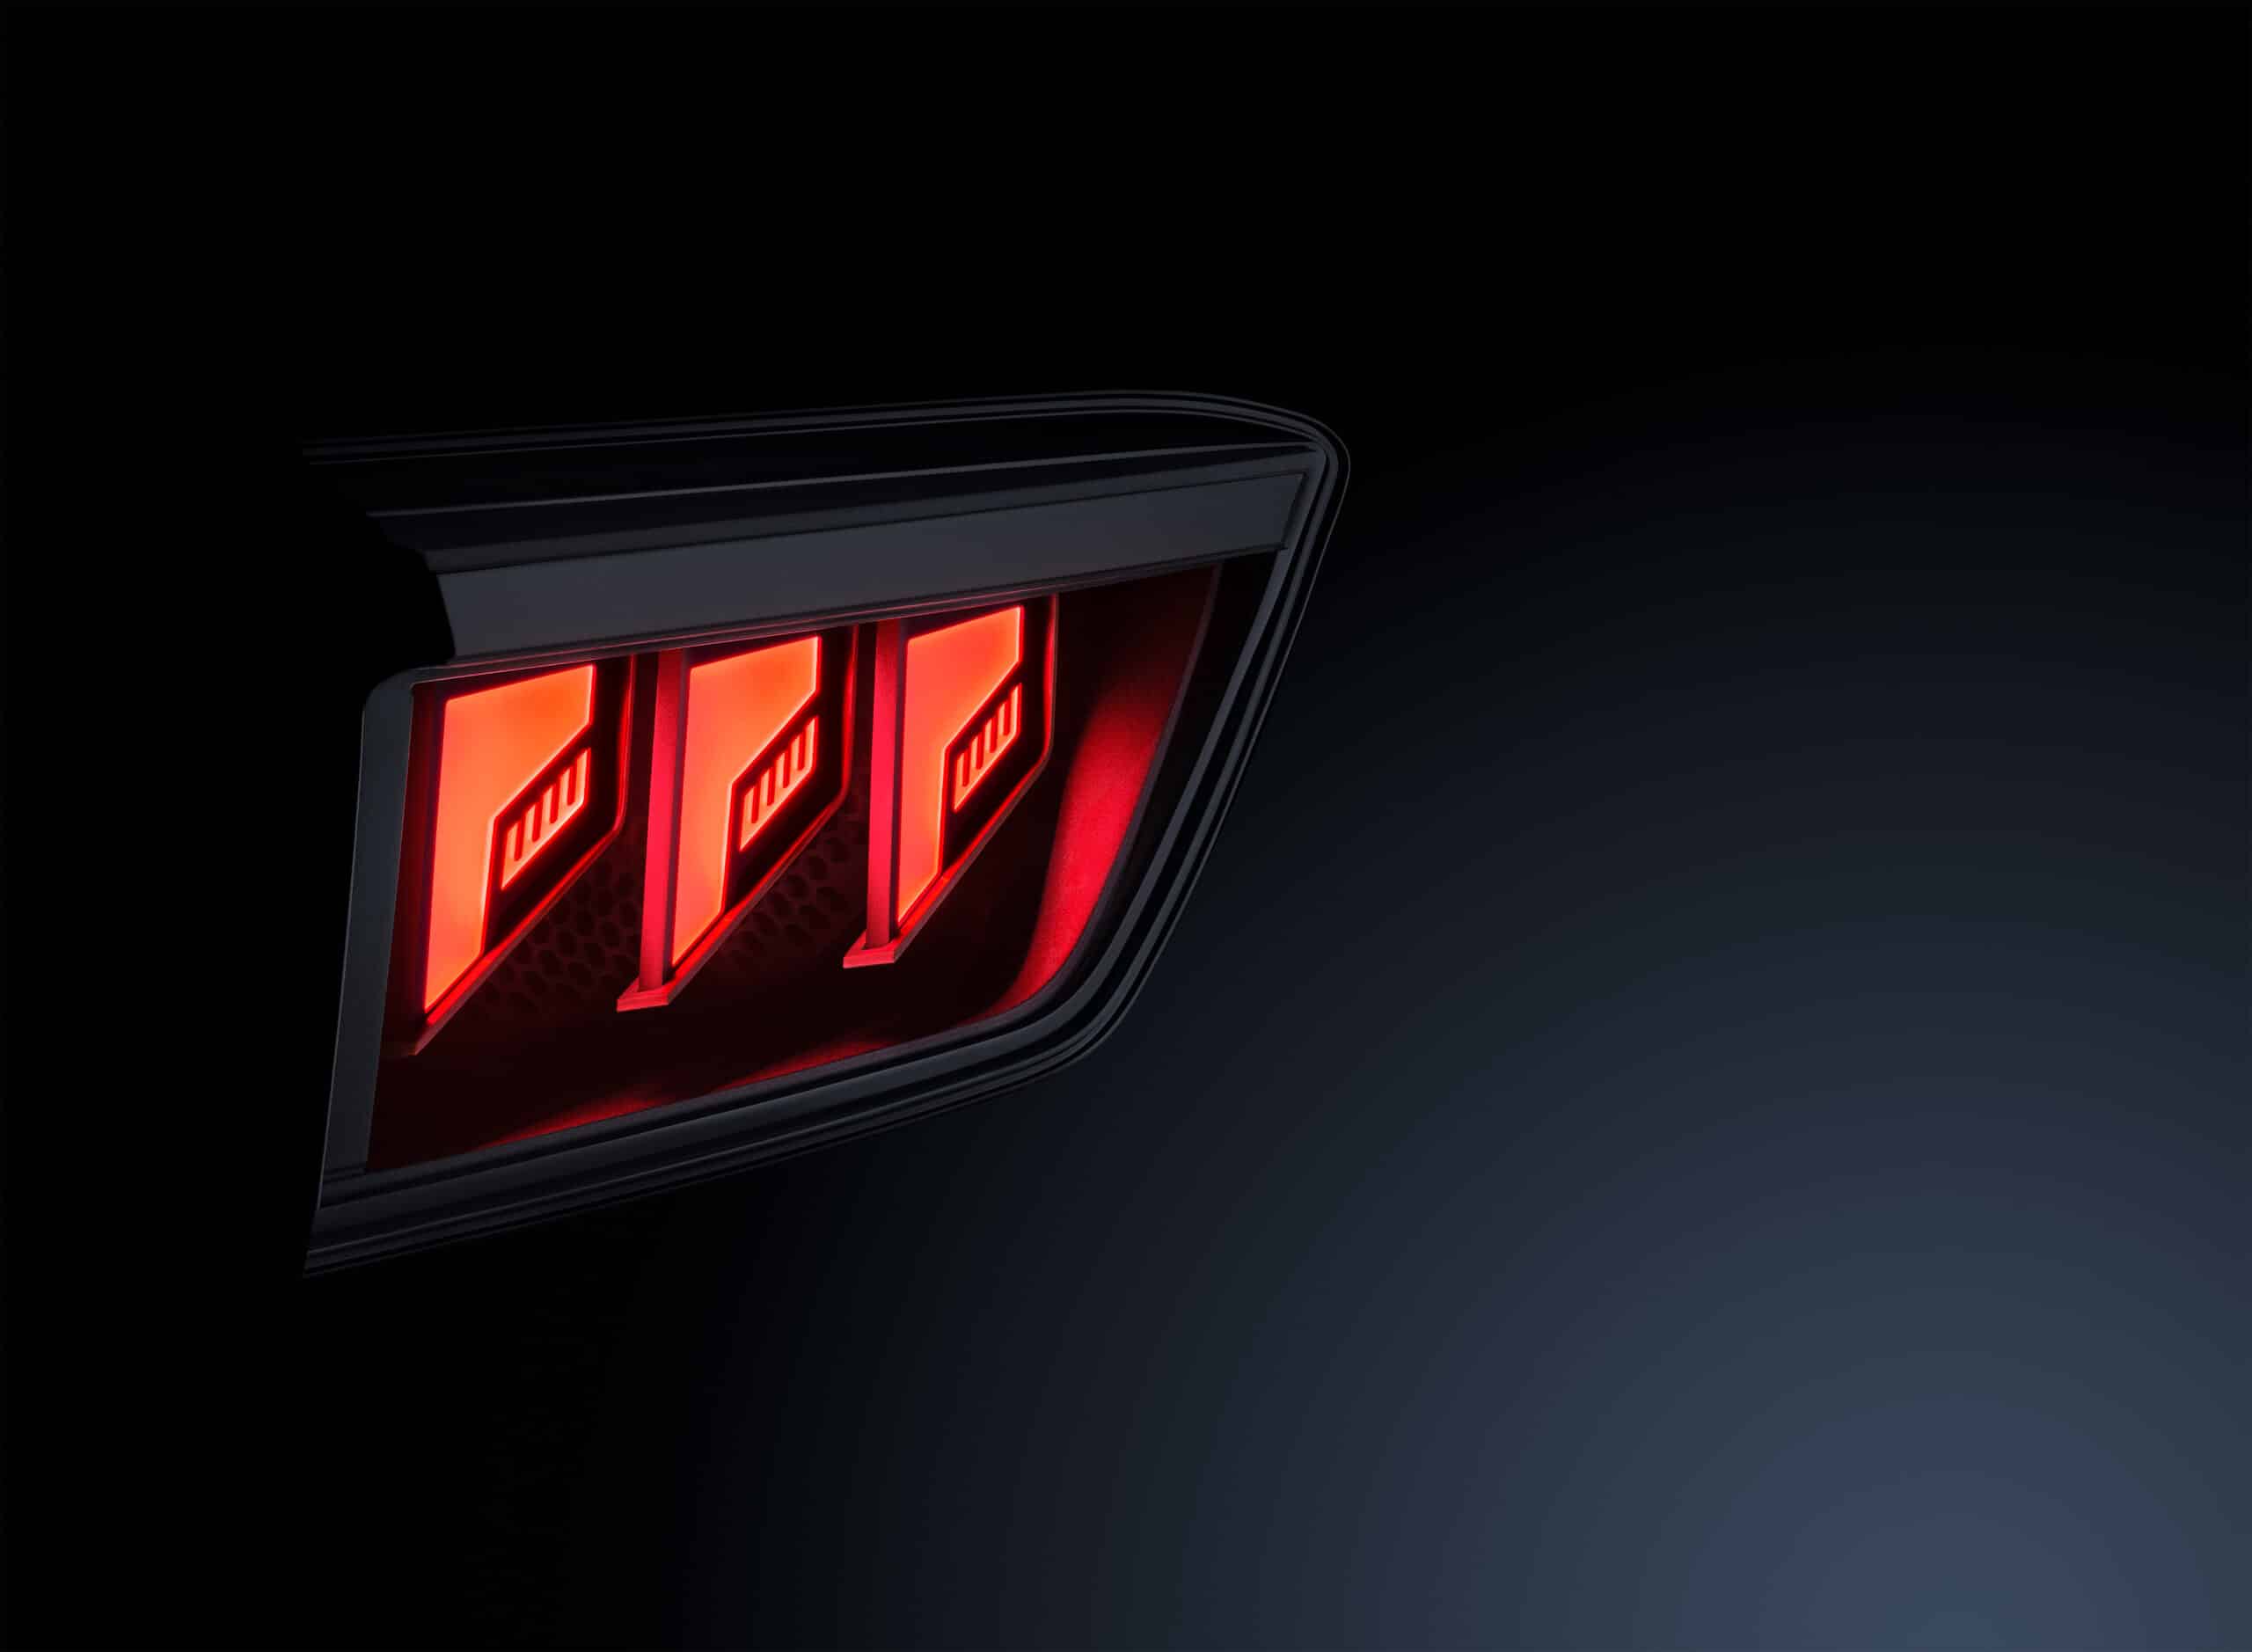 HELLA has signed a deal with an OEM for its FlatLlight combination tail lamp